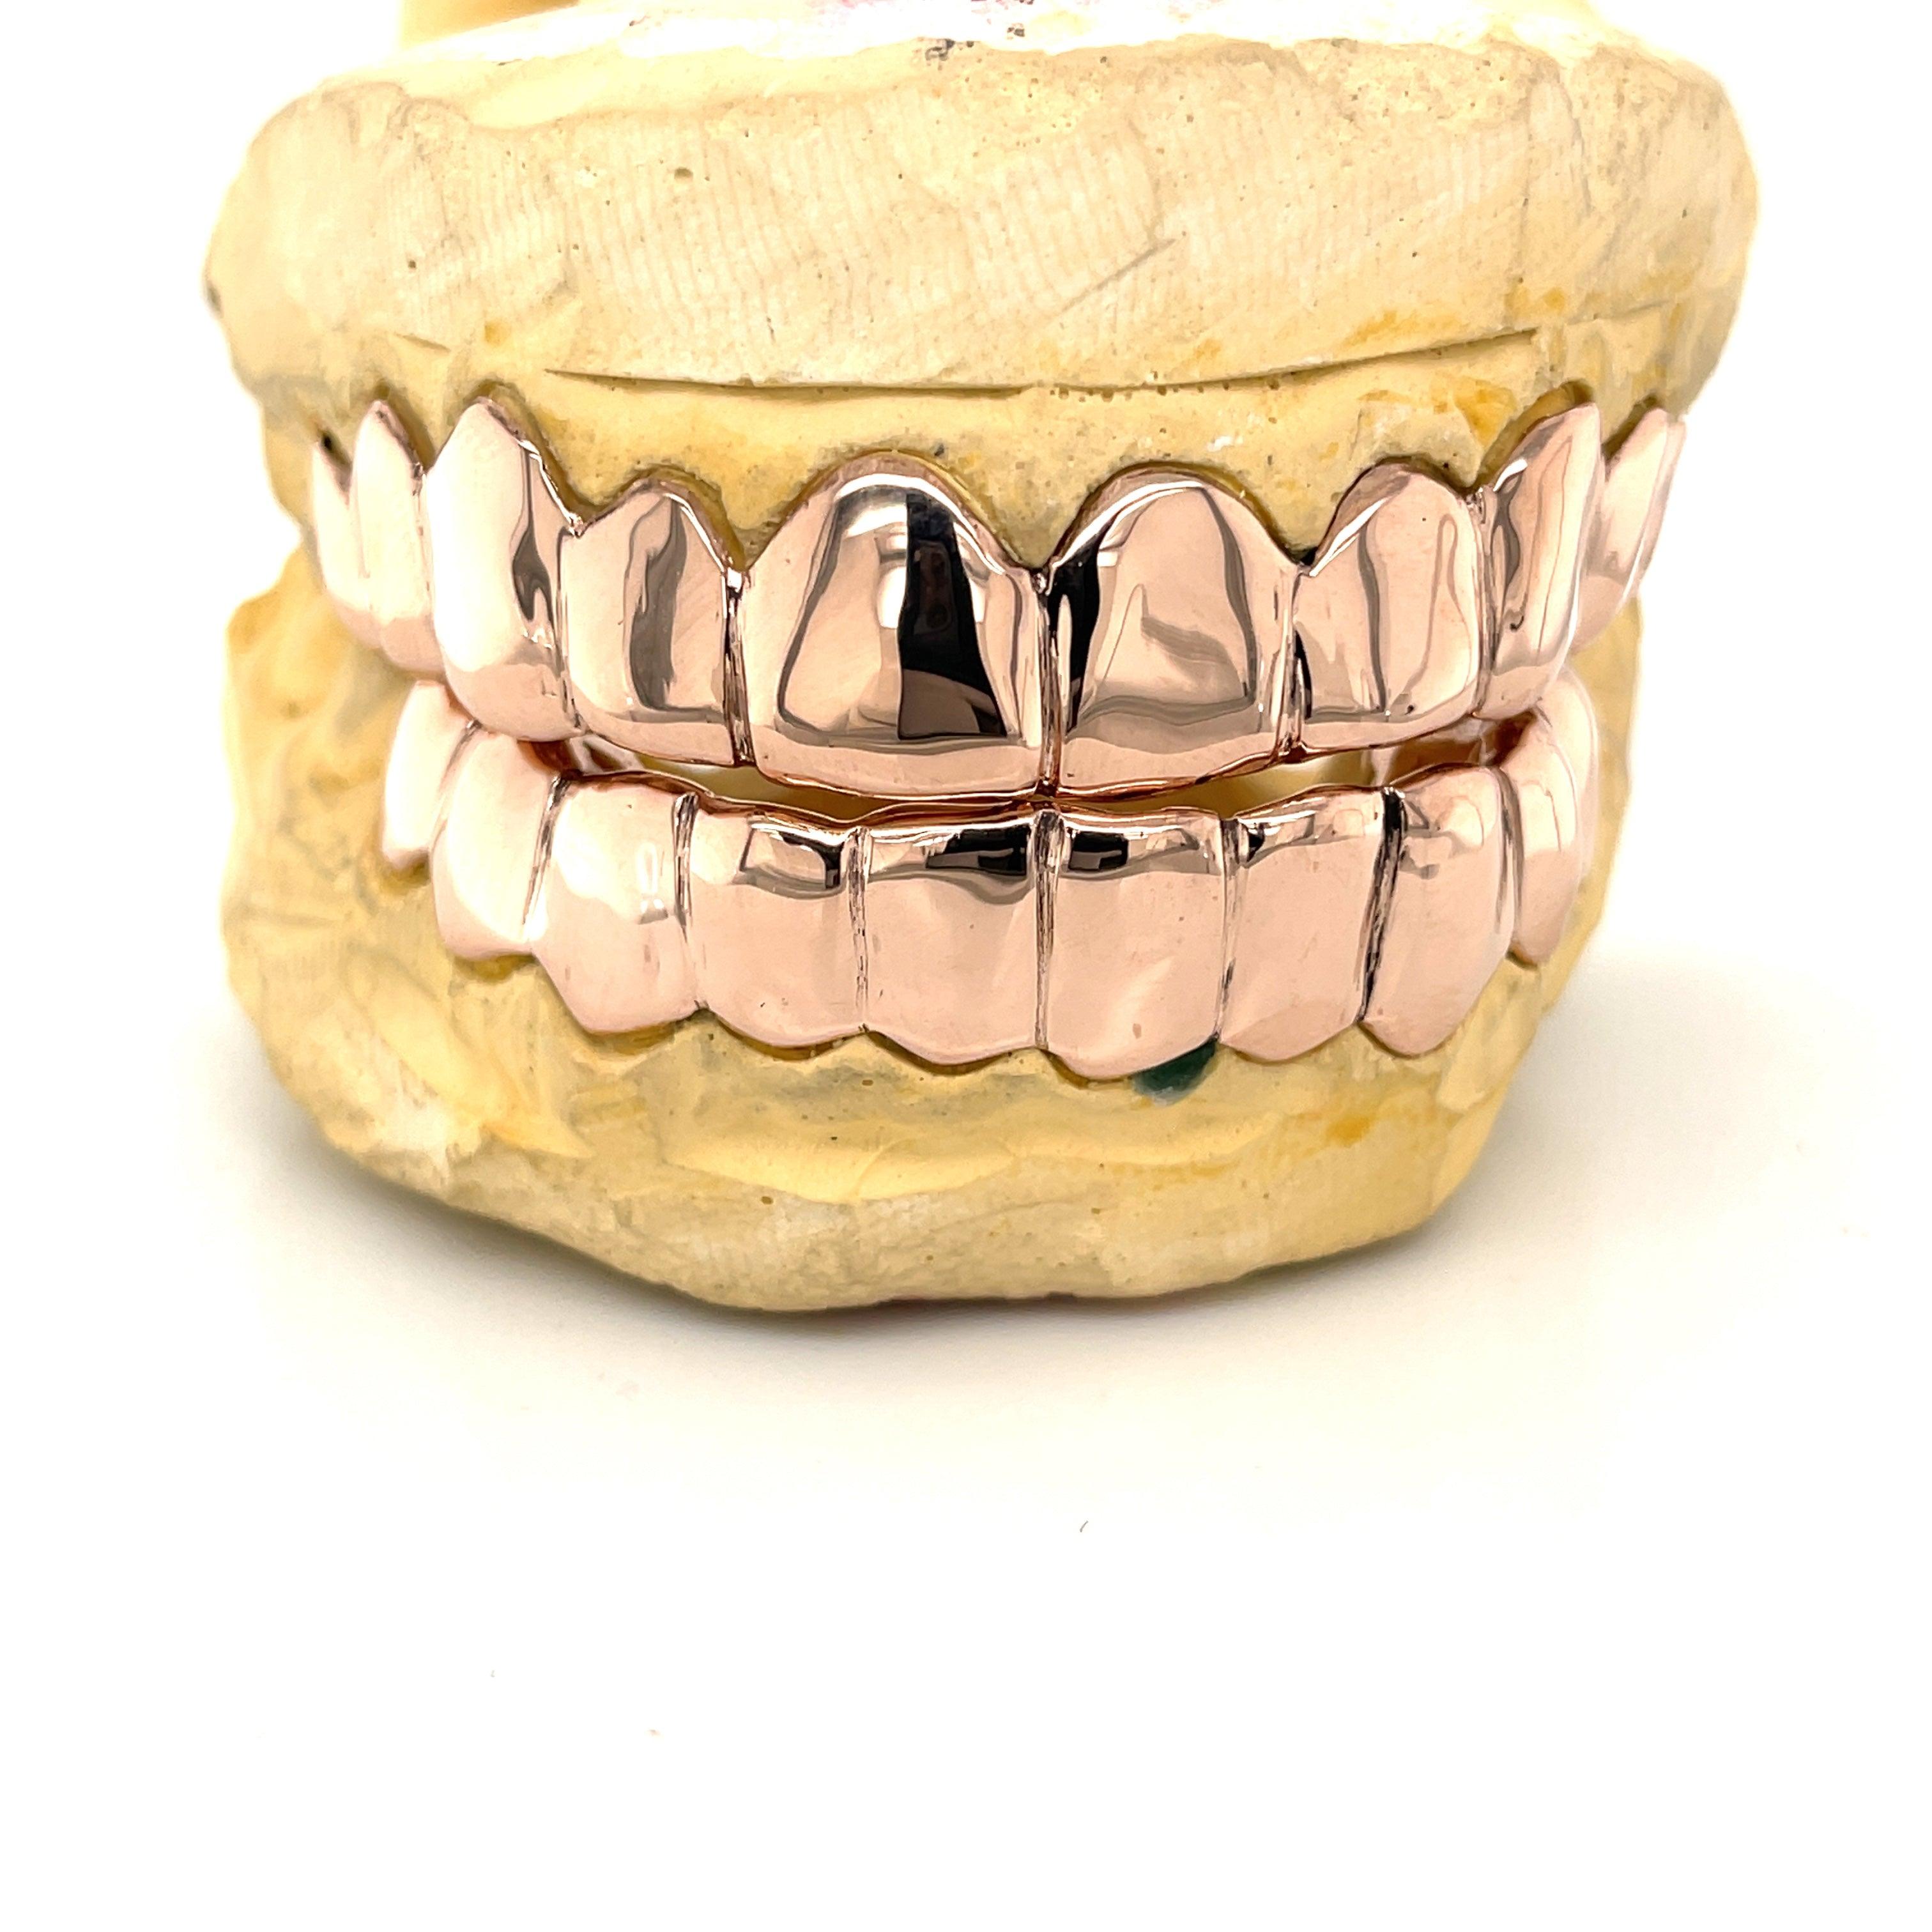 20pc Rose Gold Grillz - Seattle Gold Grillz